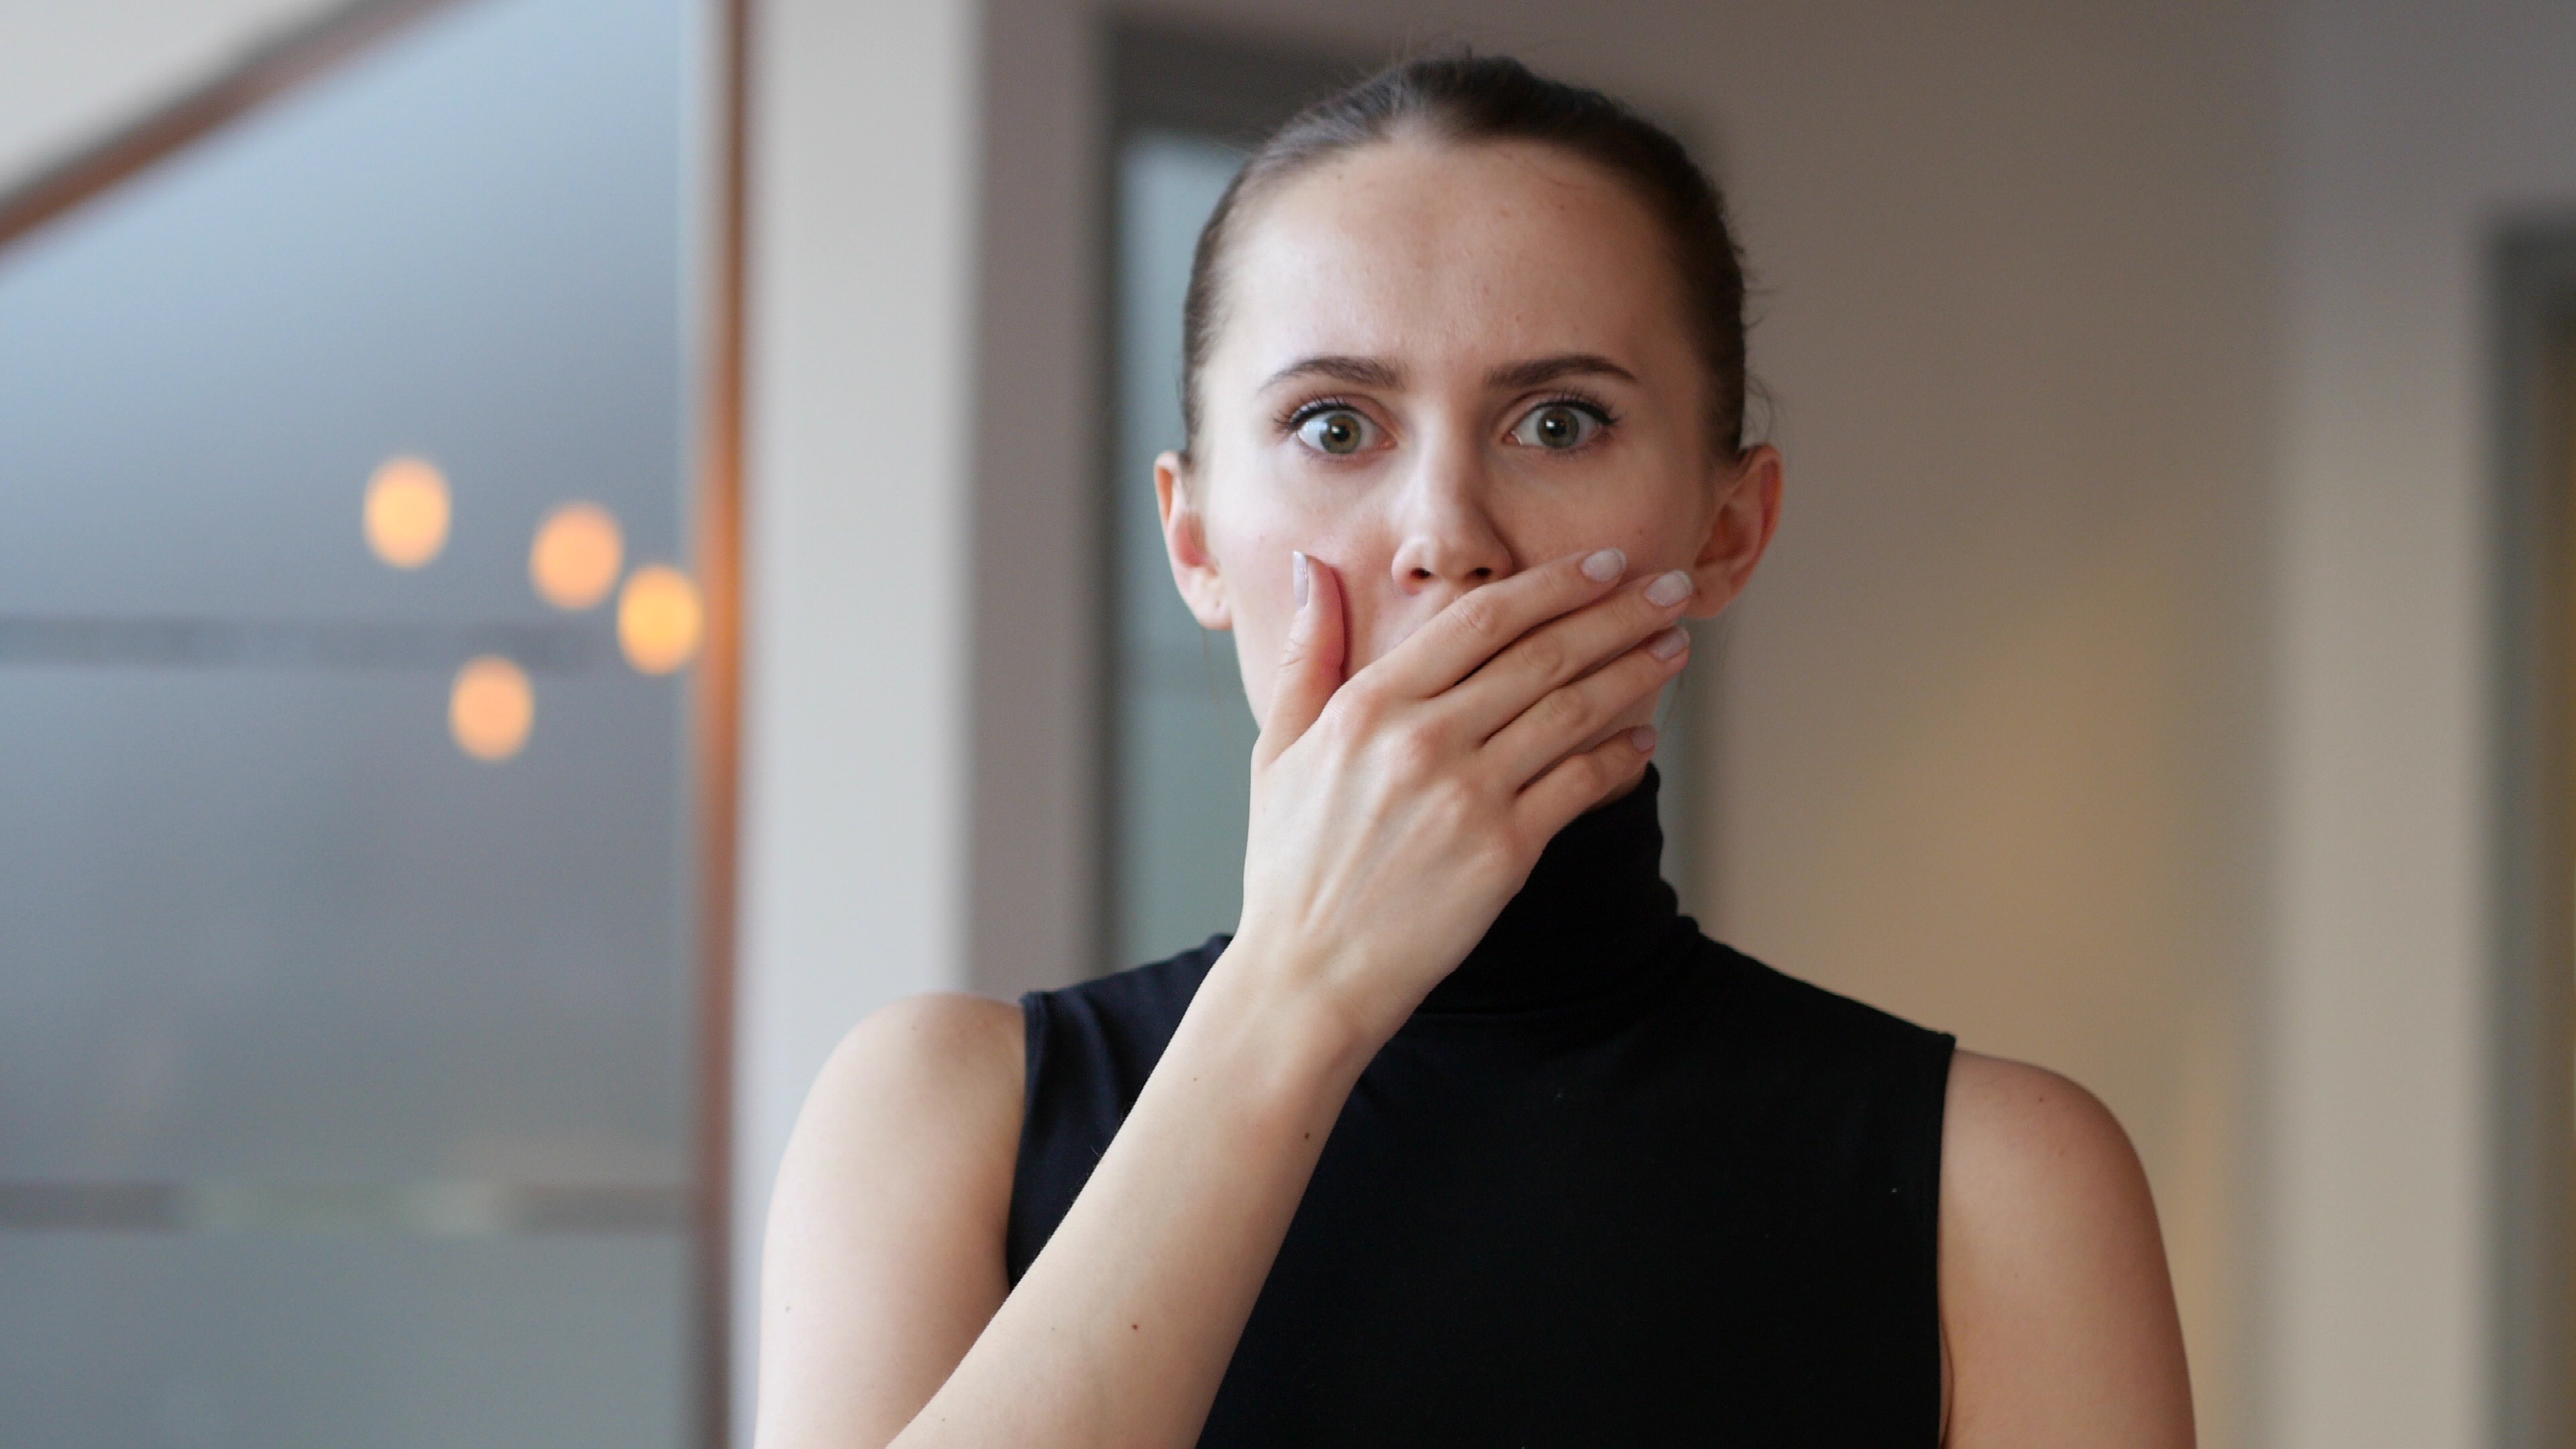 A shocked woman covering her mouth with her hand | Source: Shutterstock